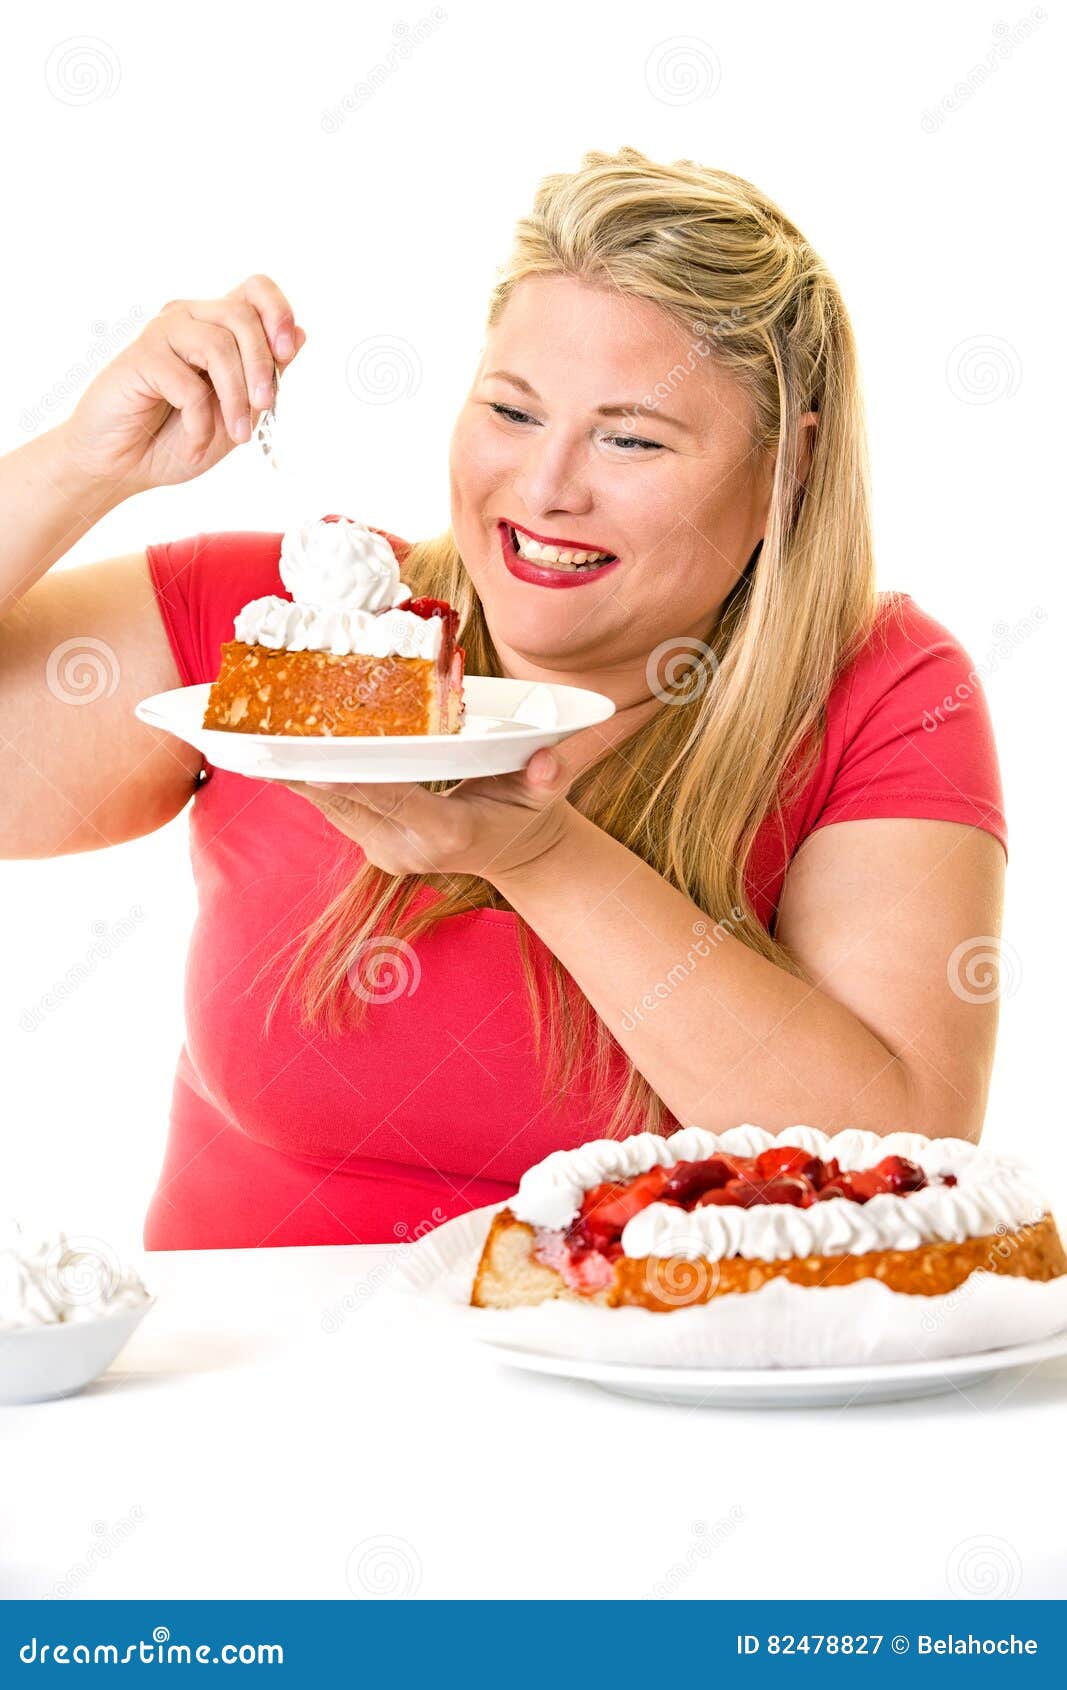 greedy blond woman with fattening cream cakes